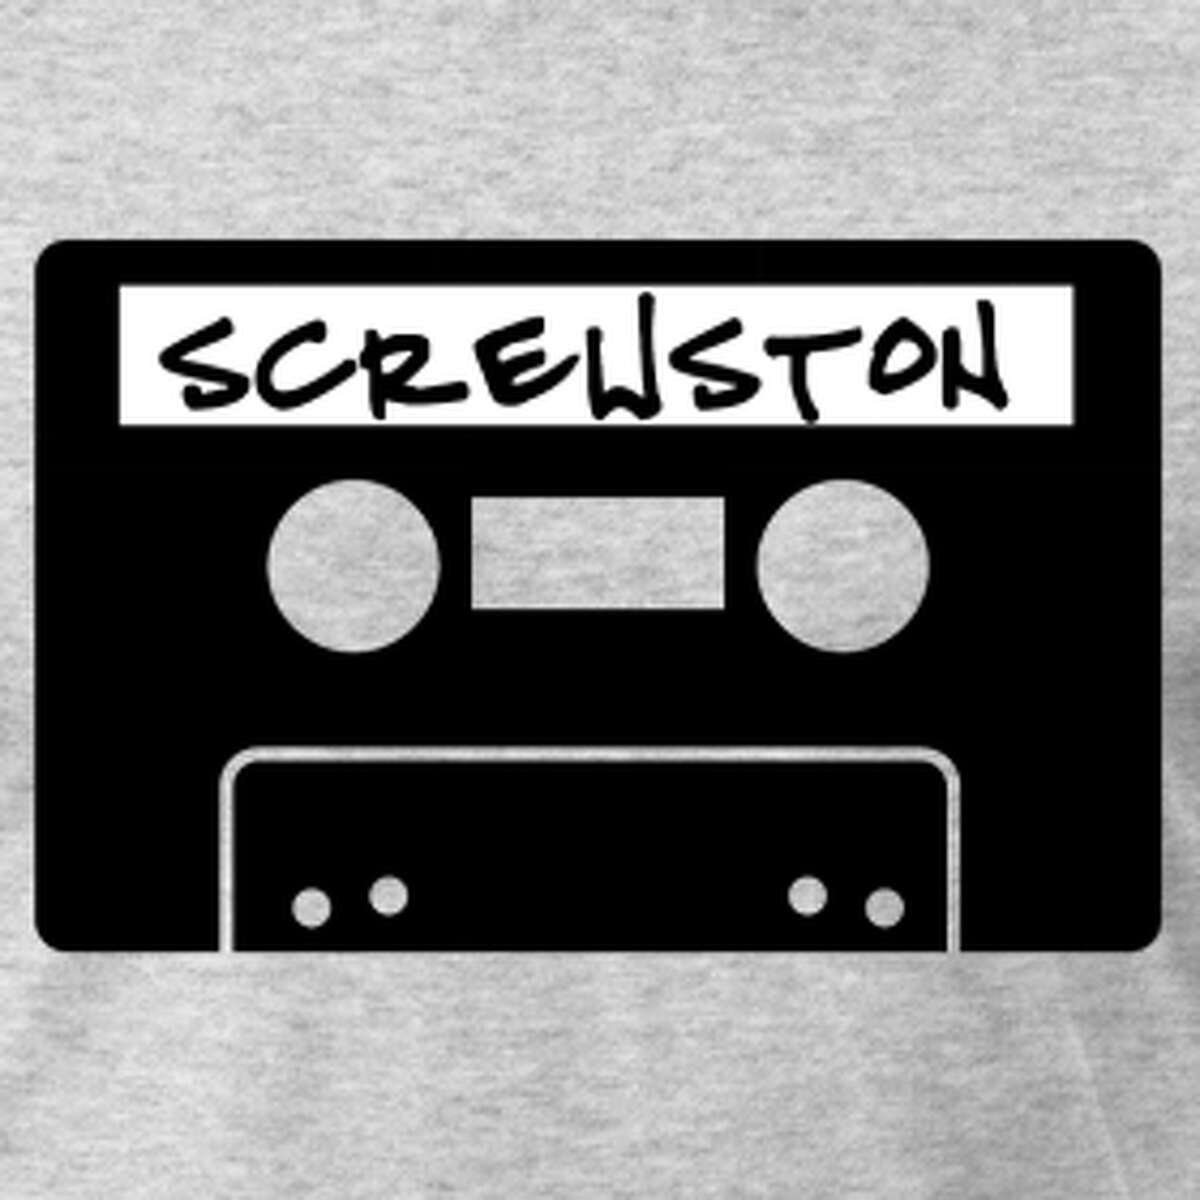 "Screwston" -- A loving tribute to DJ Screw who made all of our favorite Houston rap songs very, very, very slow.